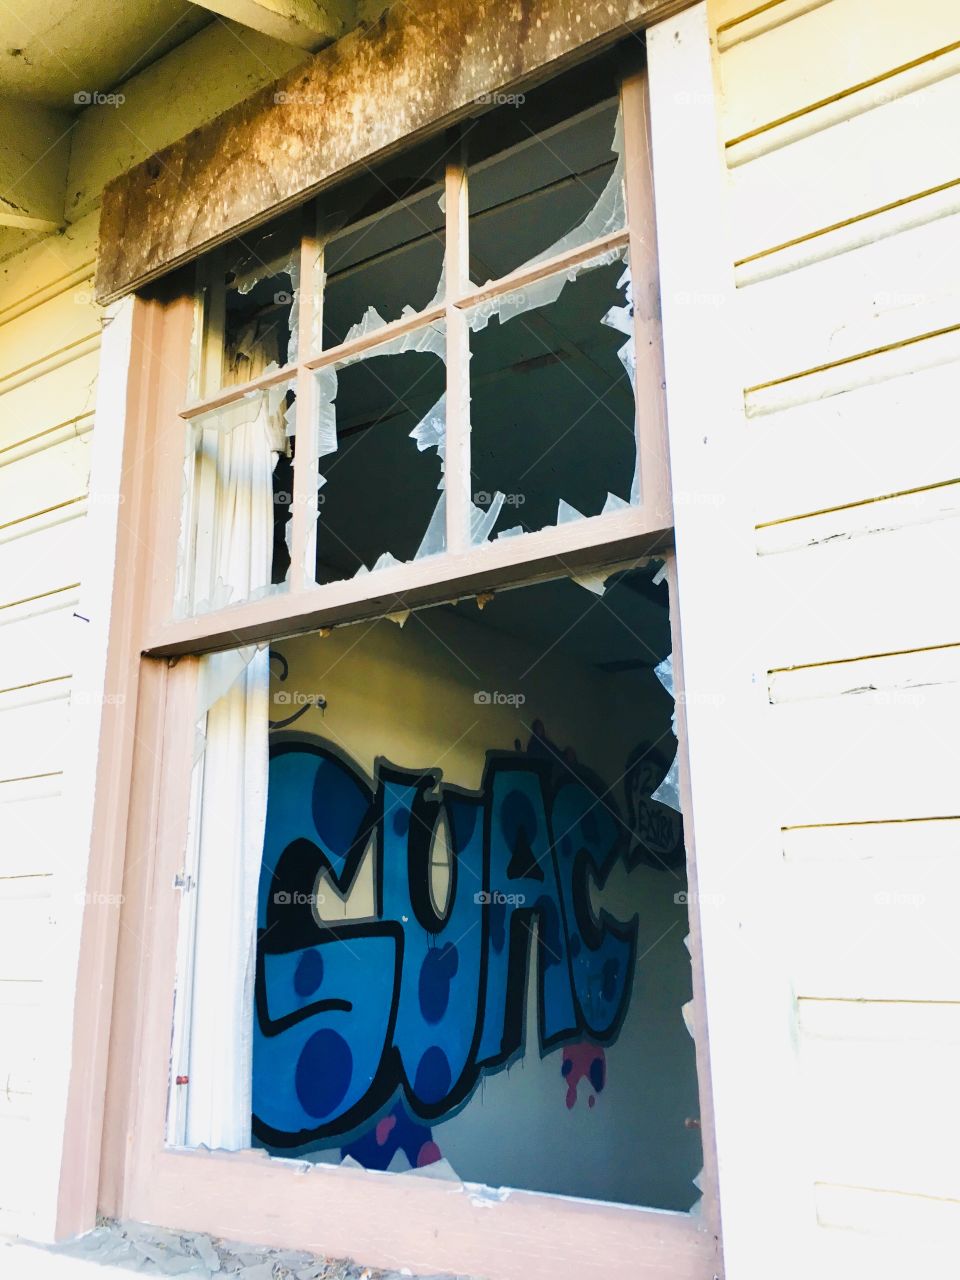 This broken window is on one of the many buildings on the former Fort Ord military installation in Monterey County. Now, youth like to hang out in the dilapidated abandoned buildings and graffiti the walls. 